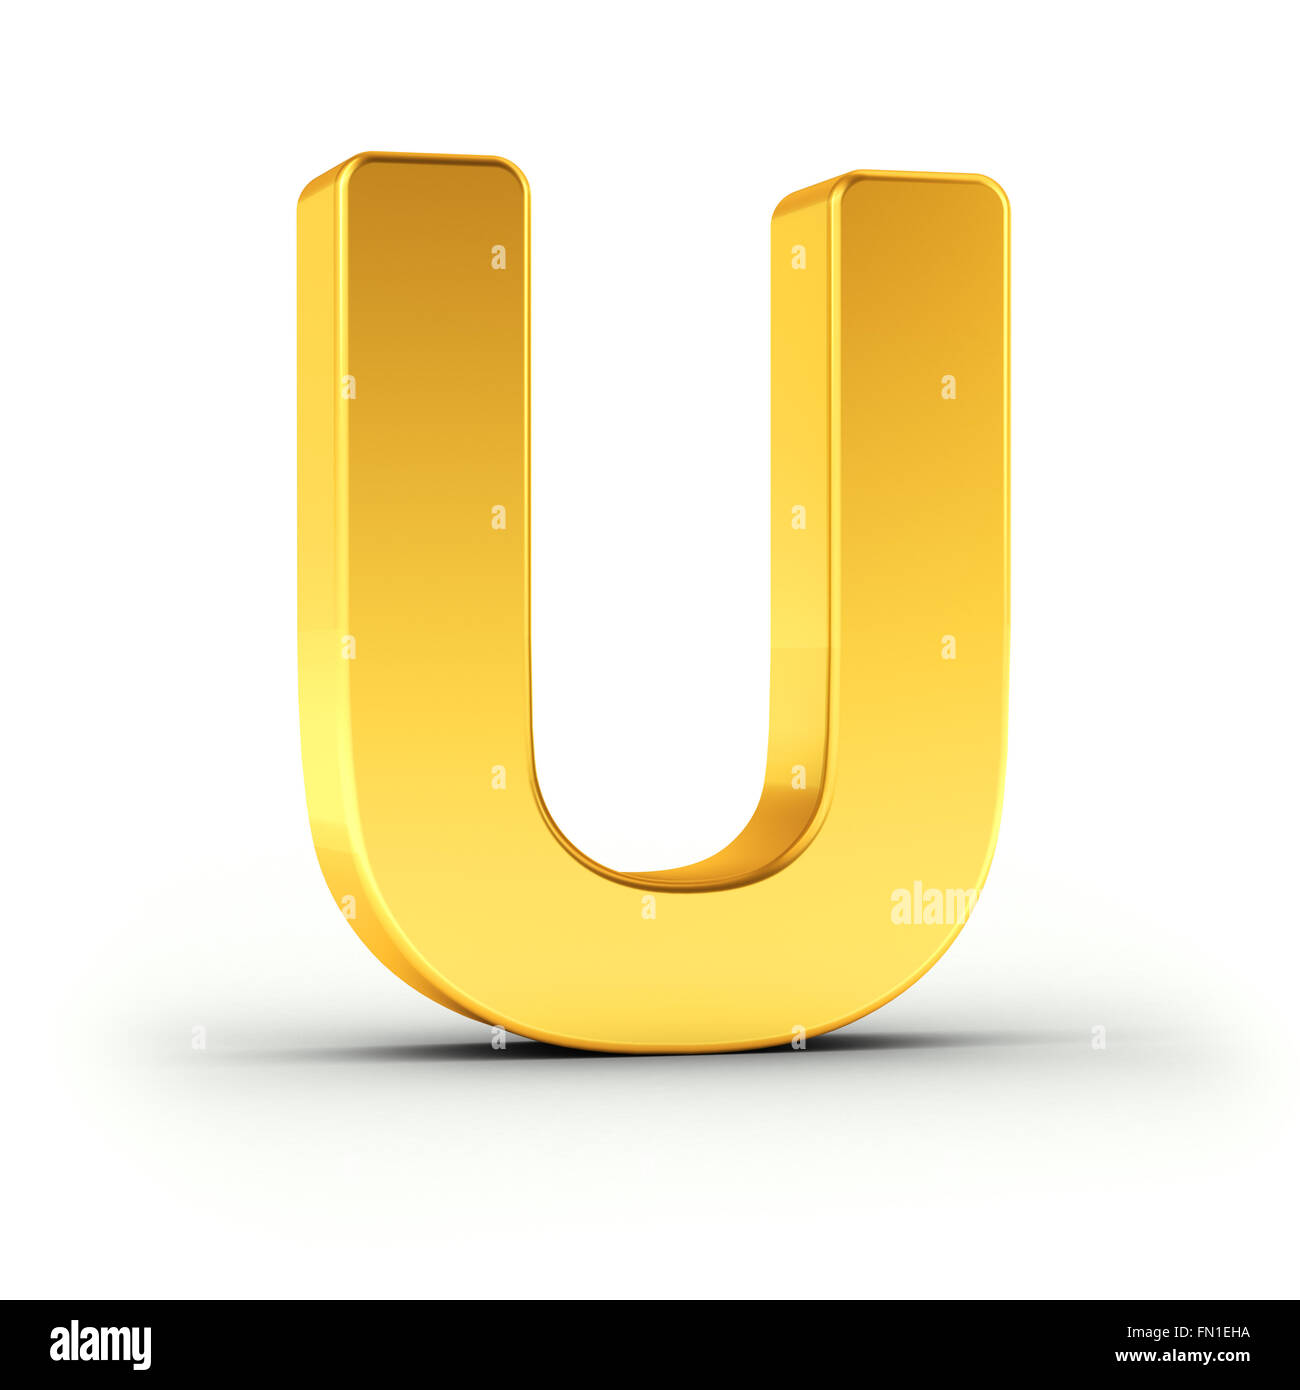 The Letter U as a polished golden object Stock Photo - Alamy